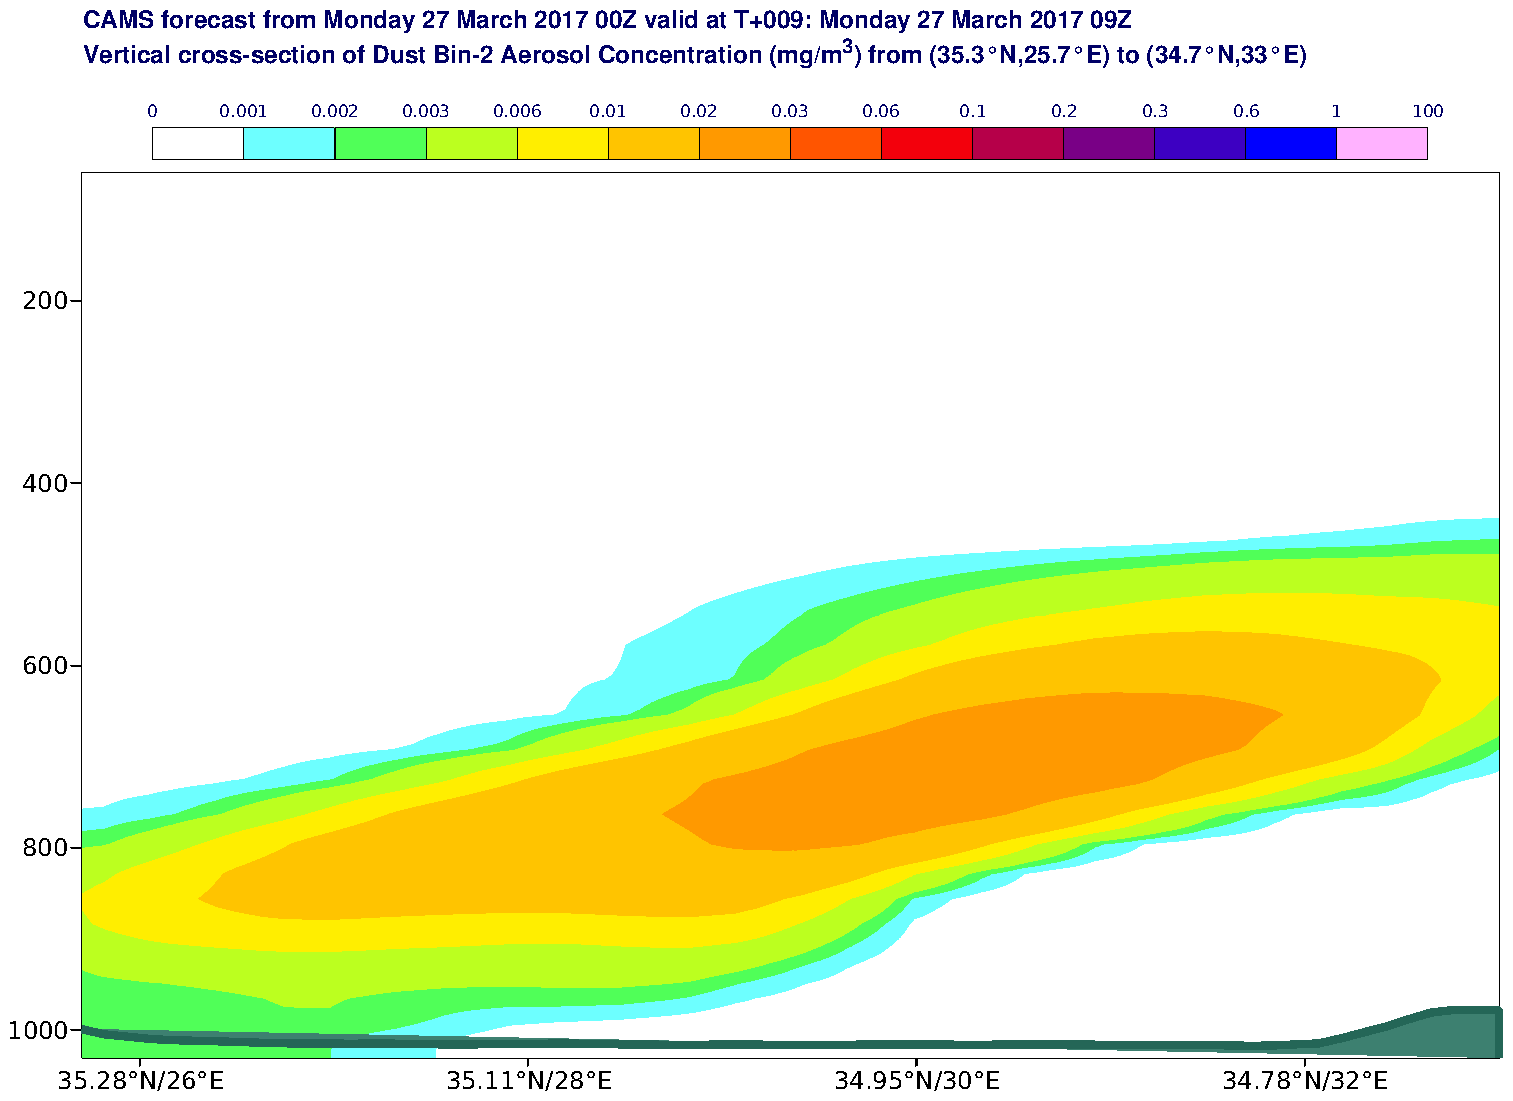 Vertical cross-section of Dust Bin-2 Aerosol Concentration (mg/m3) valid at T9 - 2017-03-27 09:00